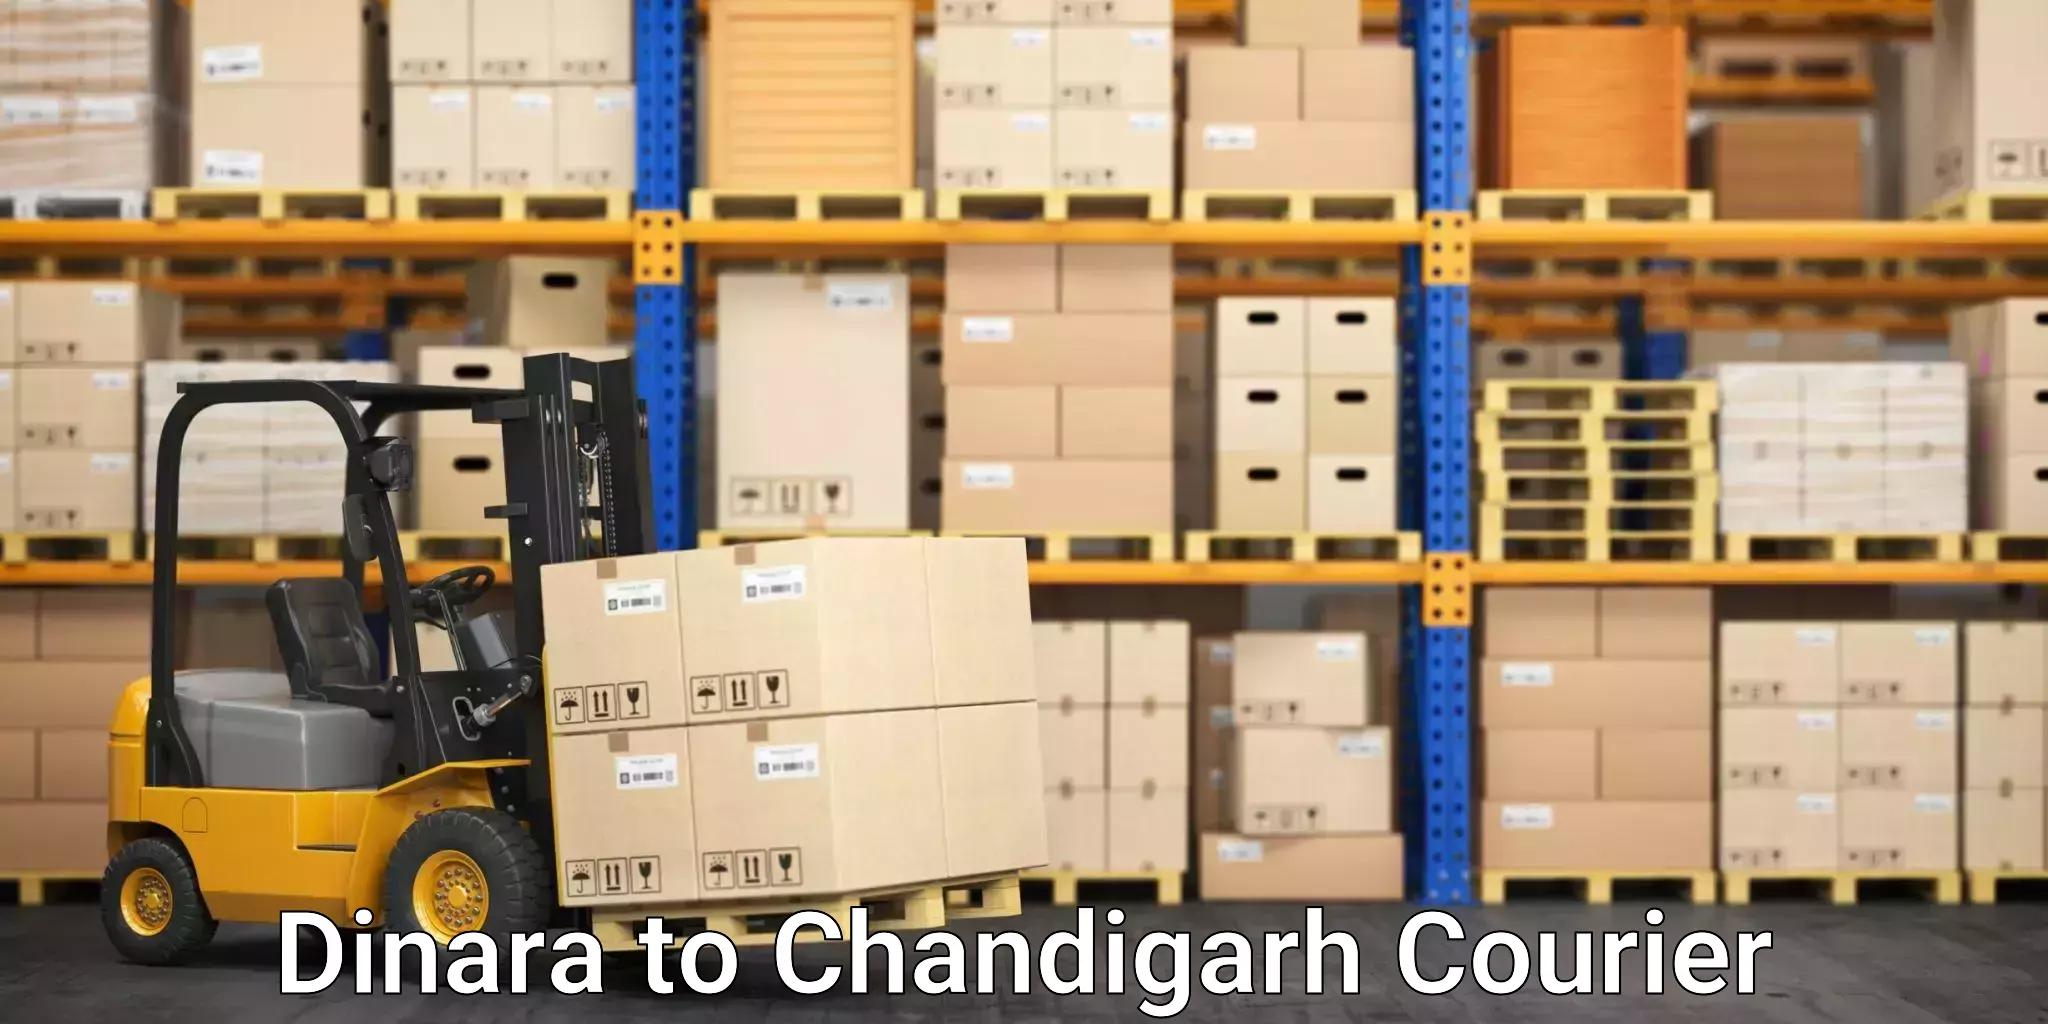 Moving service excellence Dinara to Chandigarh